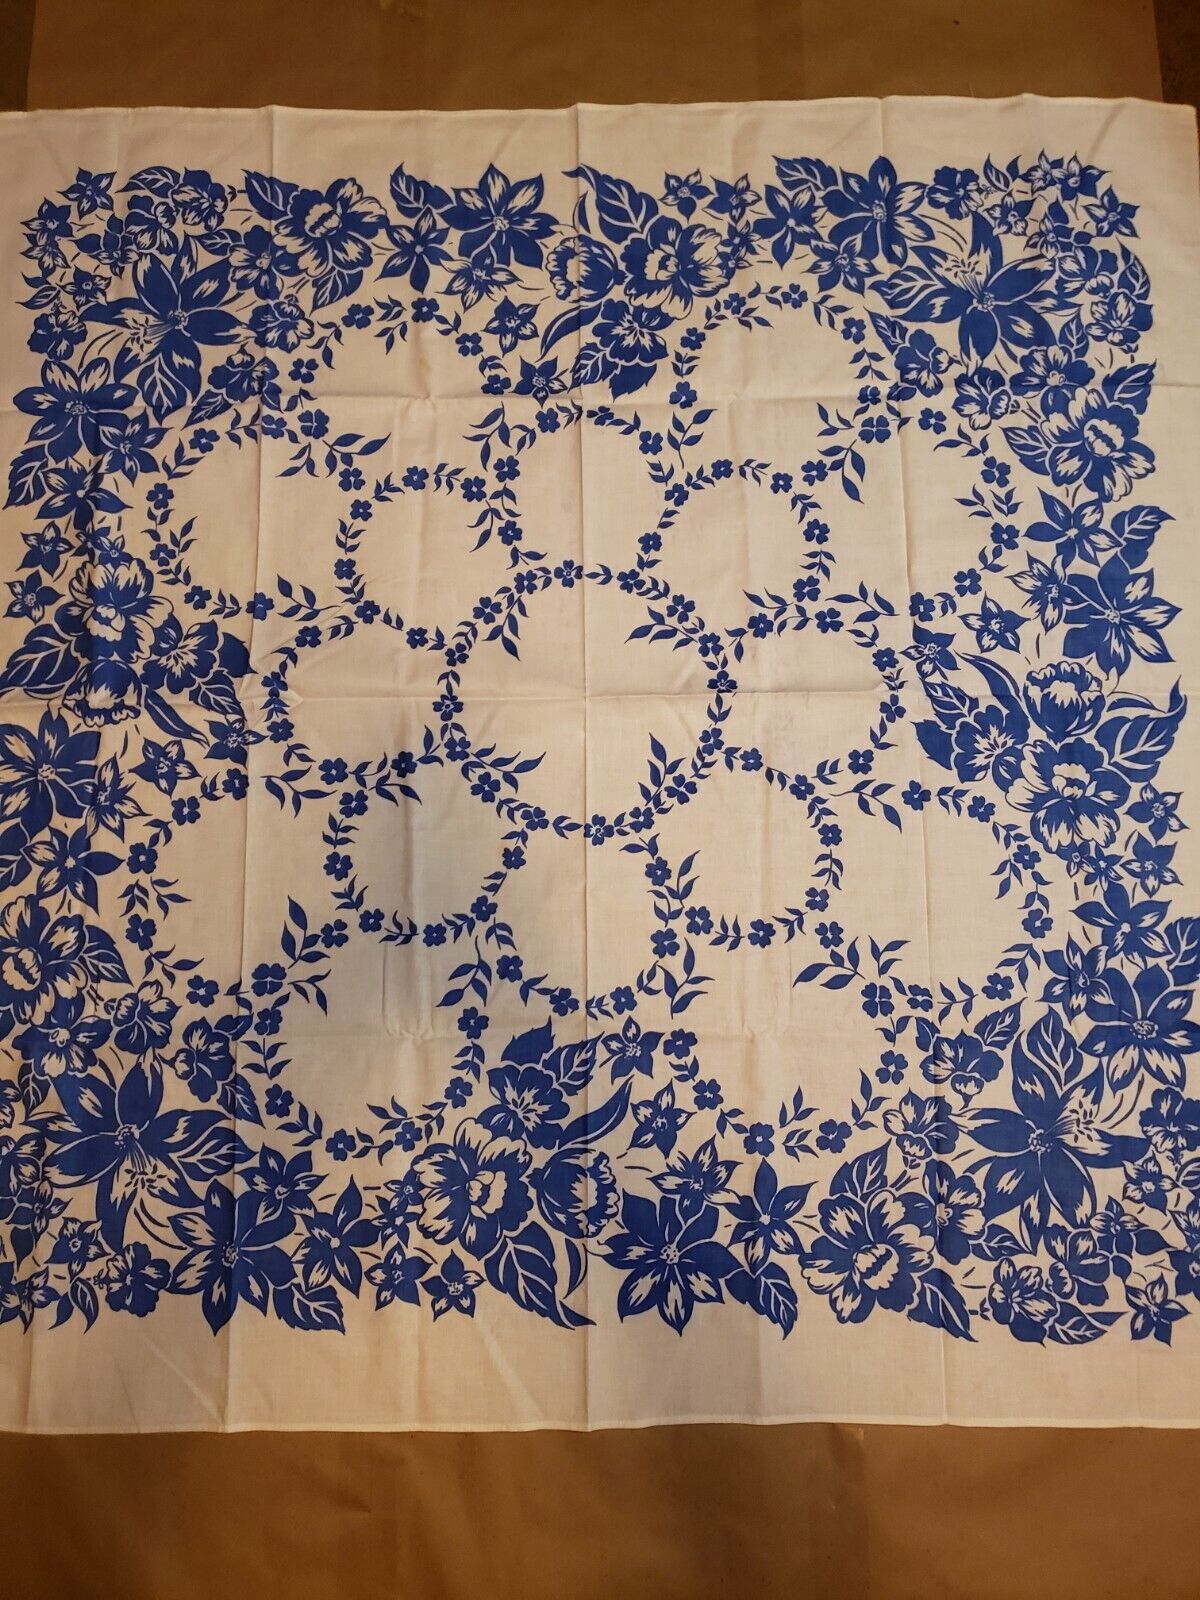 Vintage Handmade MCM Tablecloth Blue Flowers 48x48 Ready For Summer